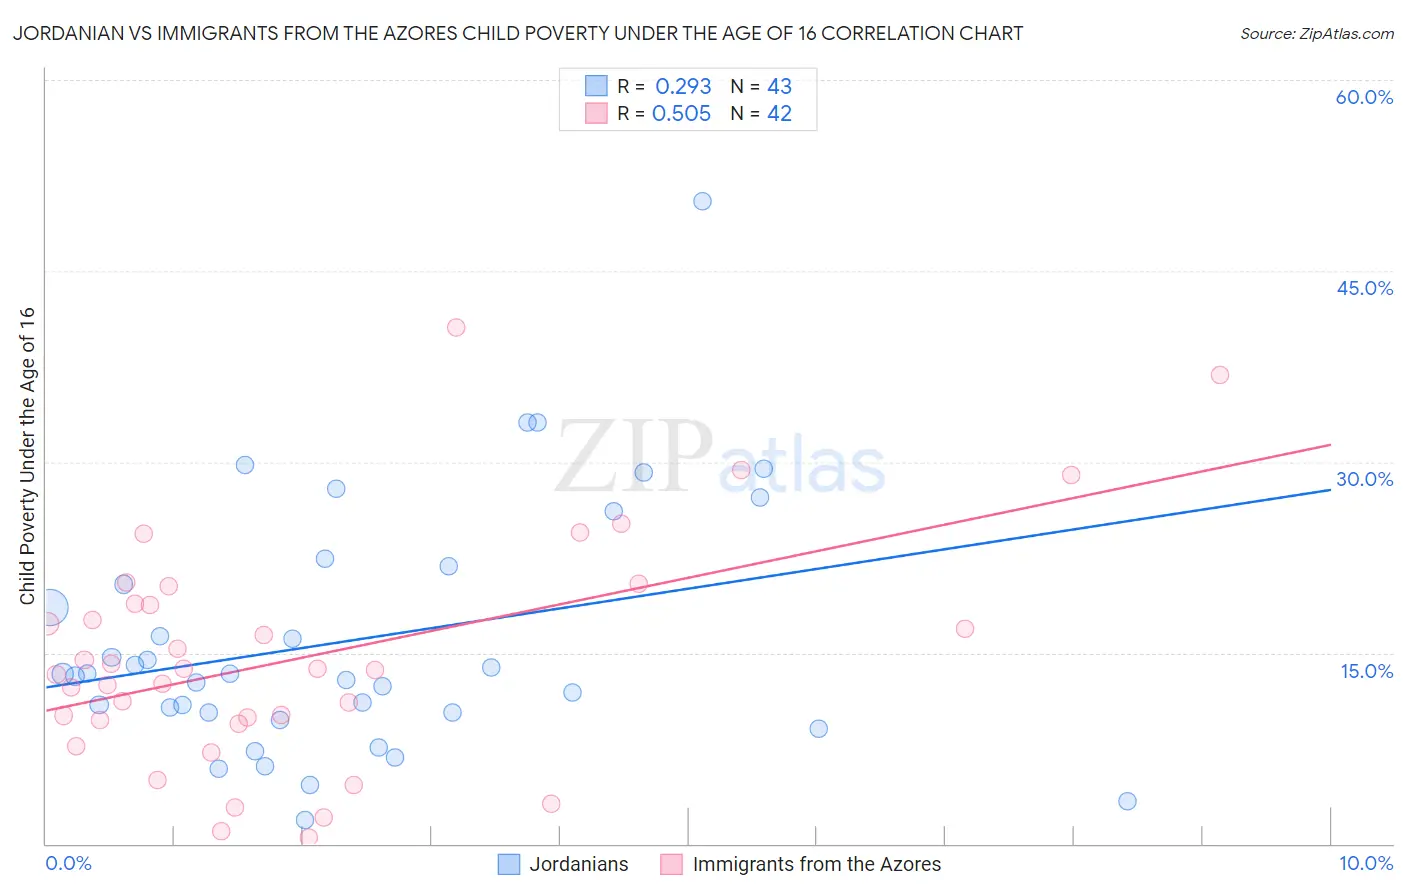 Jordanian vs Immigrants from the Azores Child Poverty Under the Age of 16